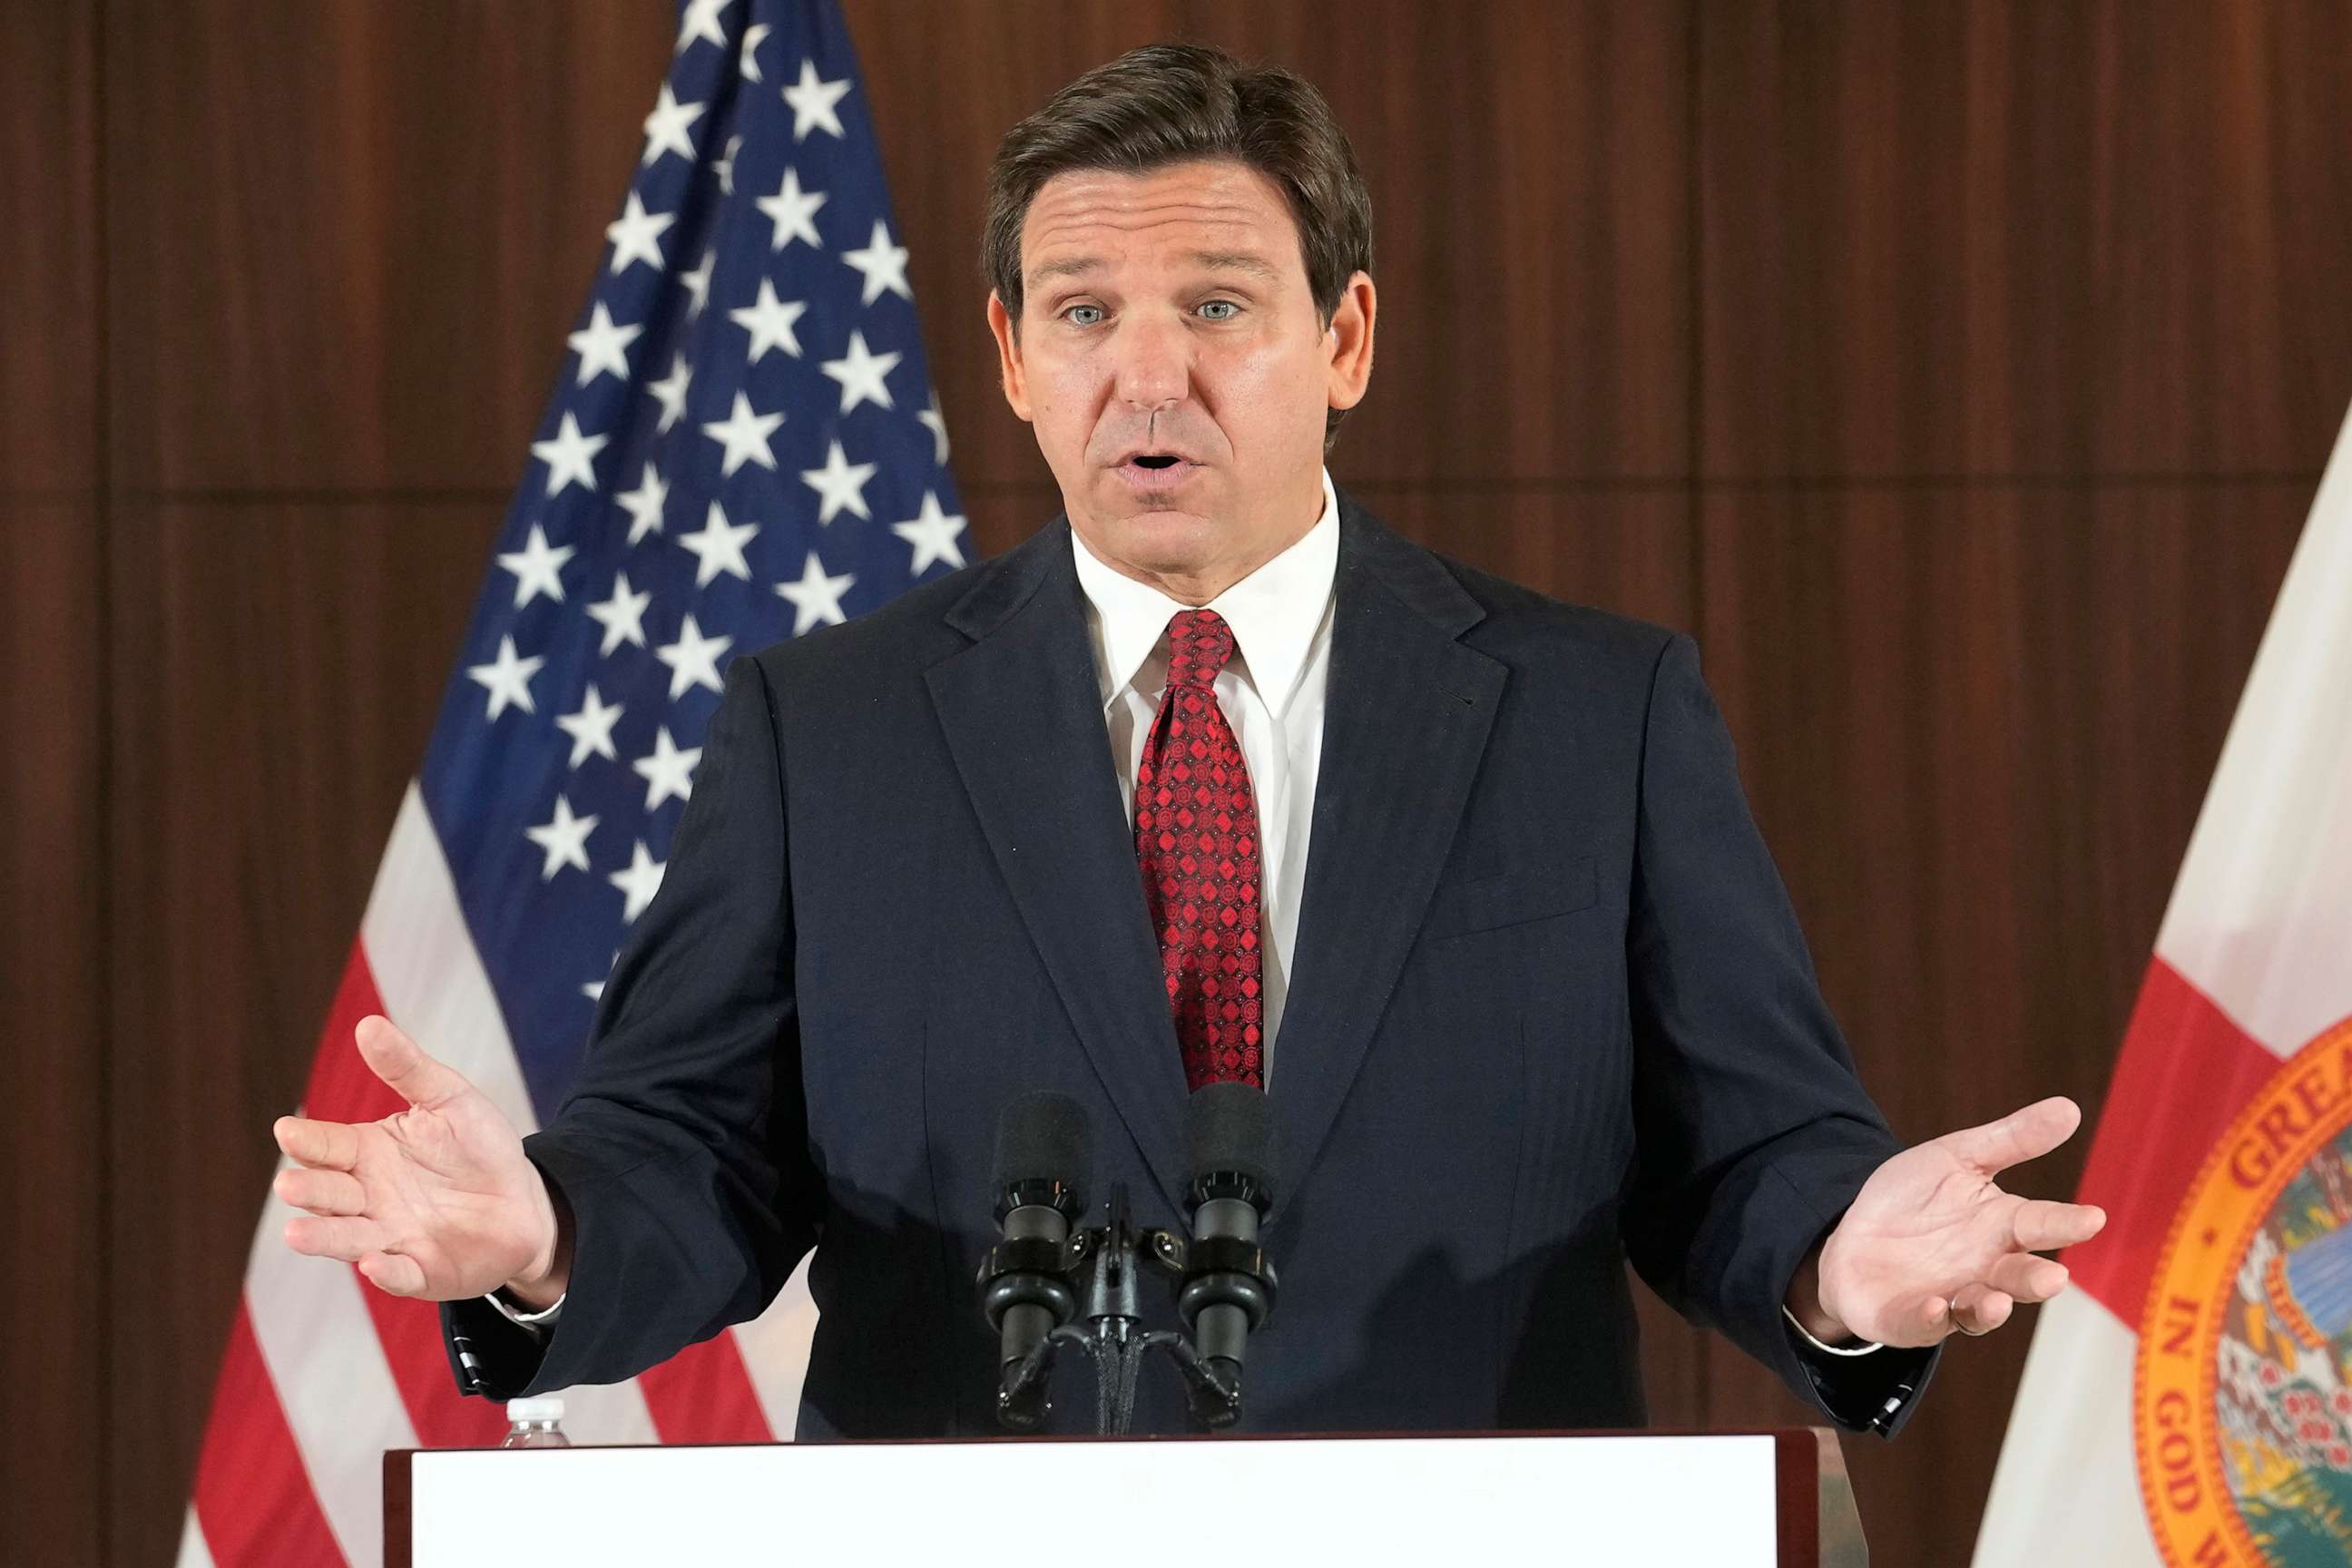 PHOTO: Governor Ron DeSantis gestures during a news conference where he spoke of new law enforcement legislation that will be introduced during the upcoming session, Jan. 26, 2023, in Miami.